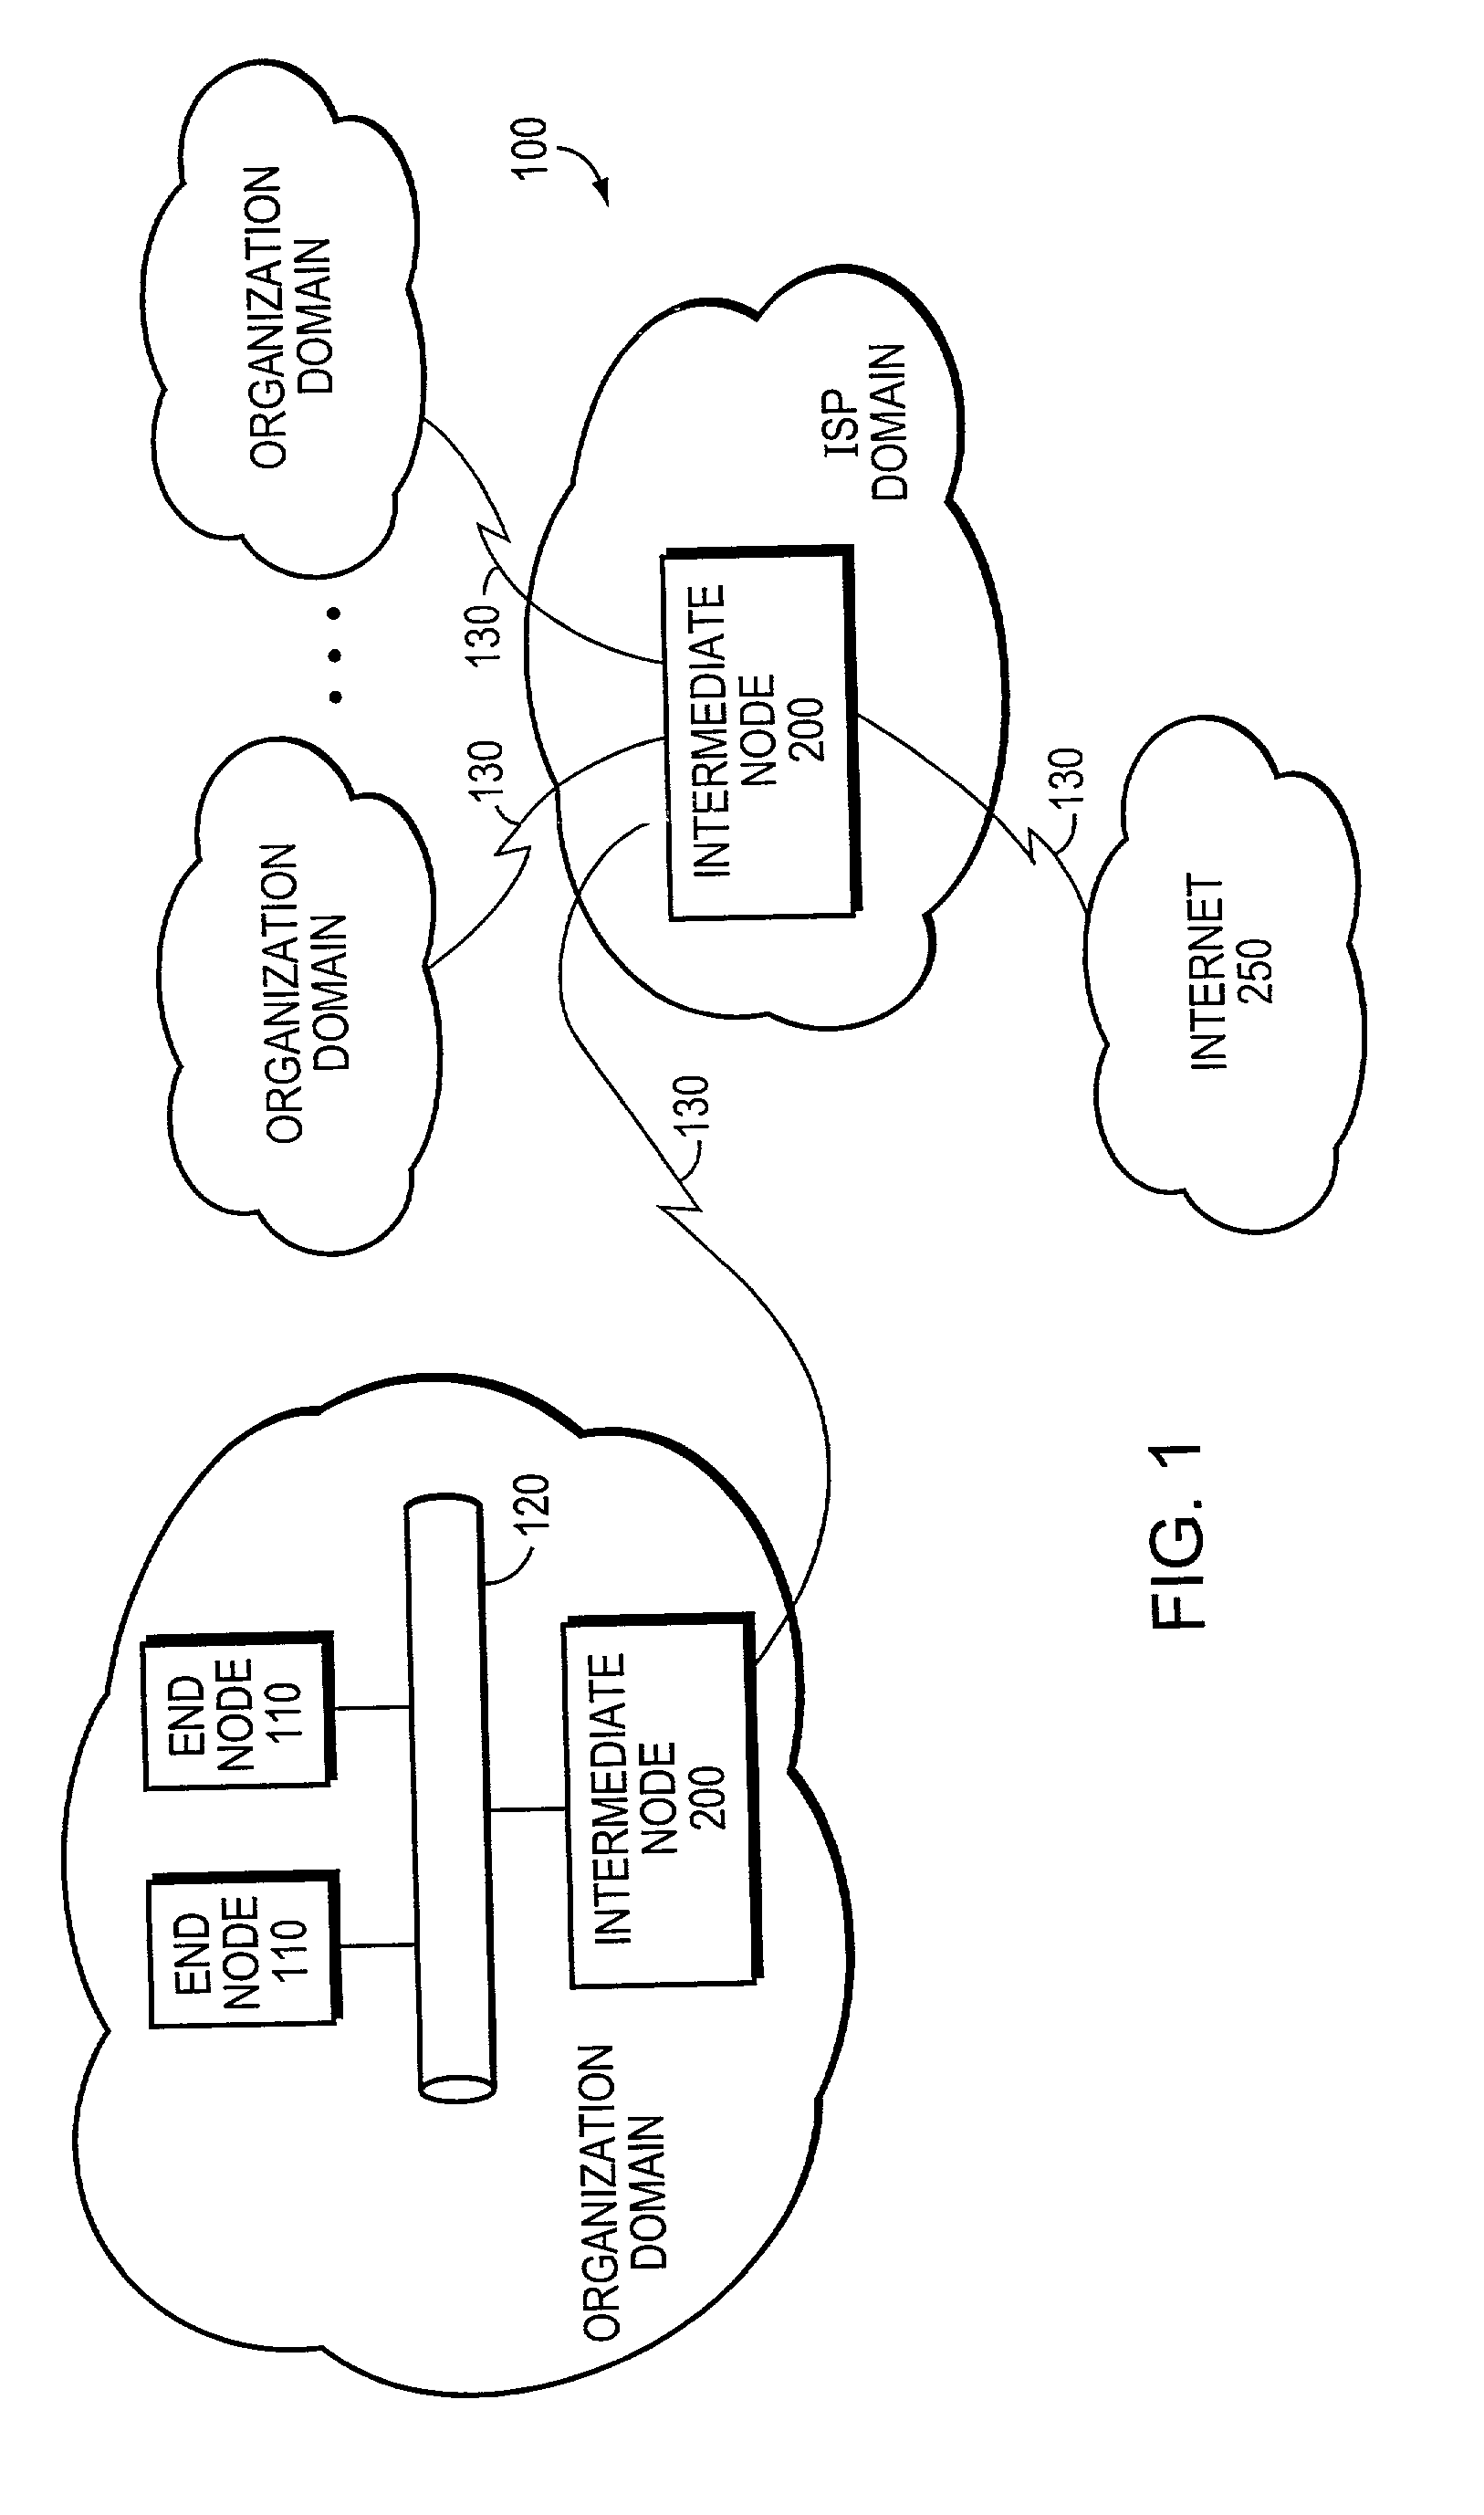 Scheduling assist for data networking packet dequeuing in a parallel 1-D systolic array system